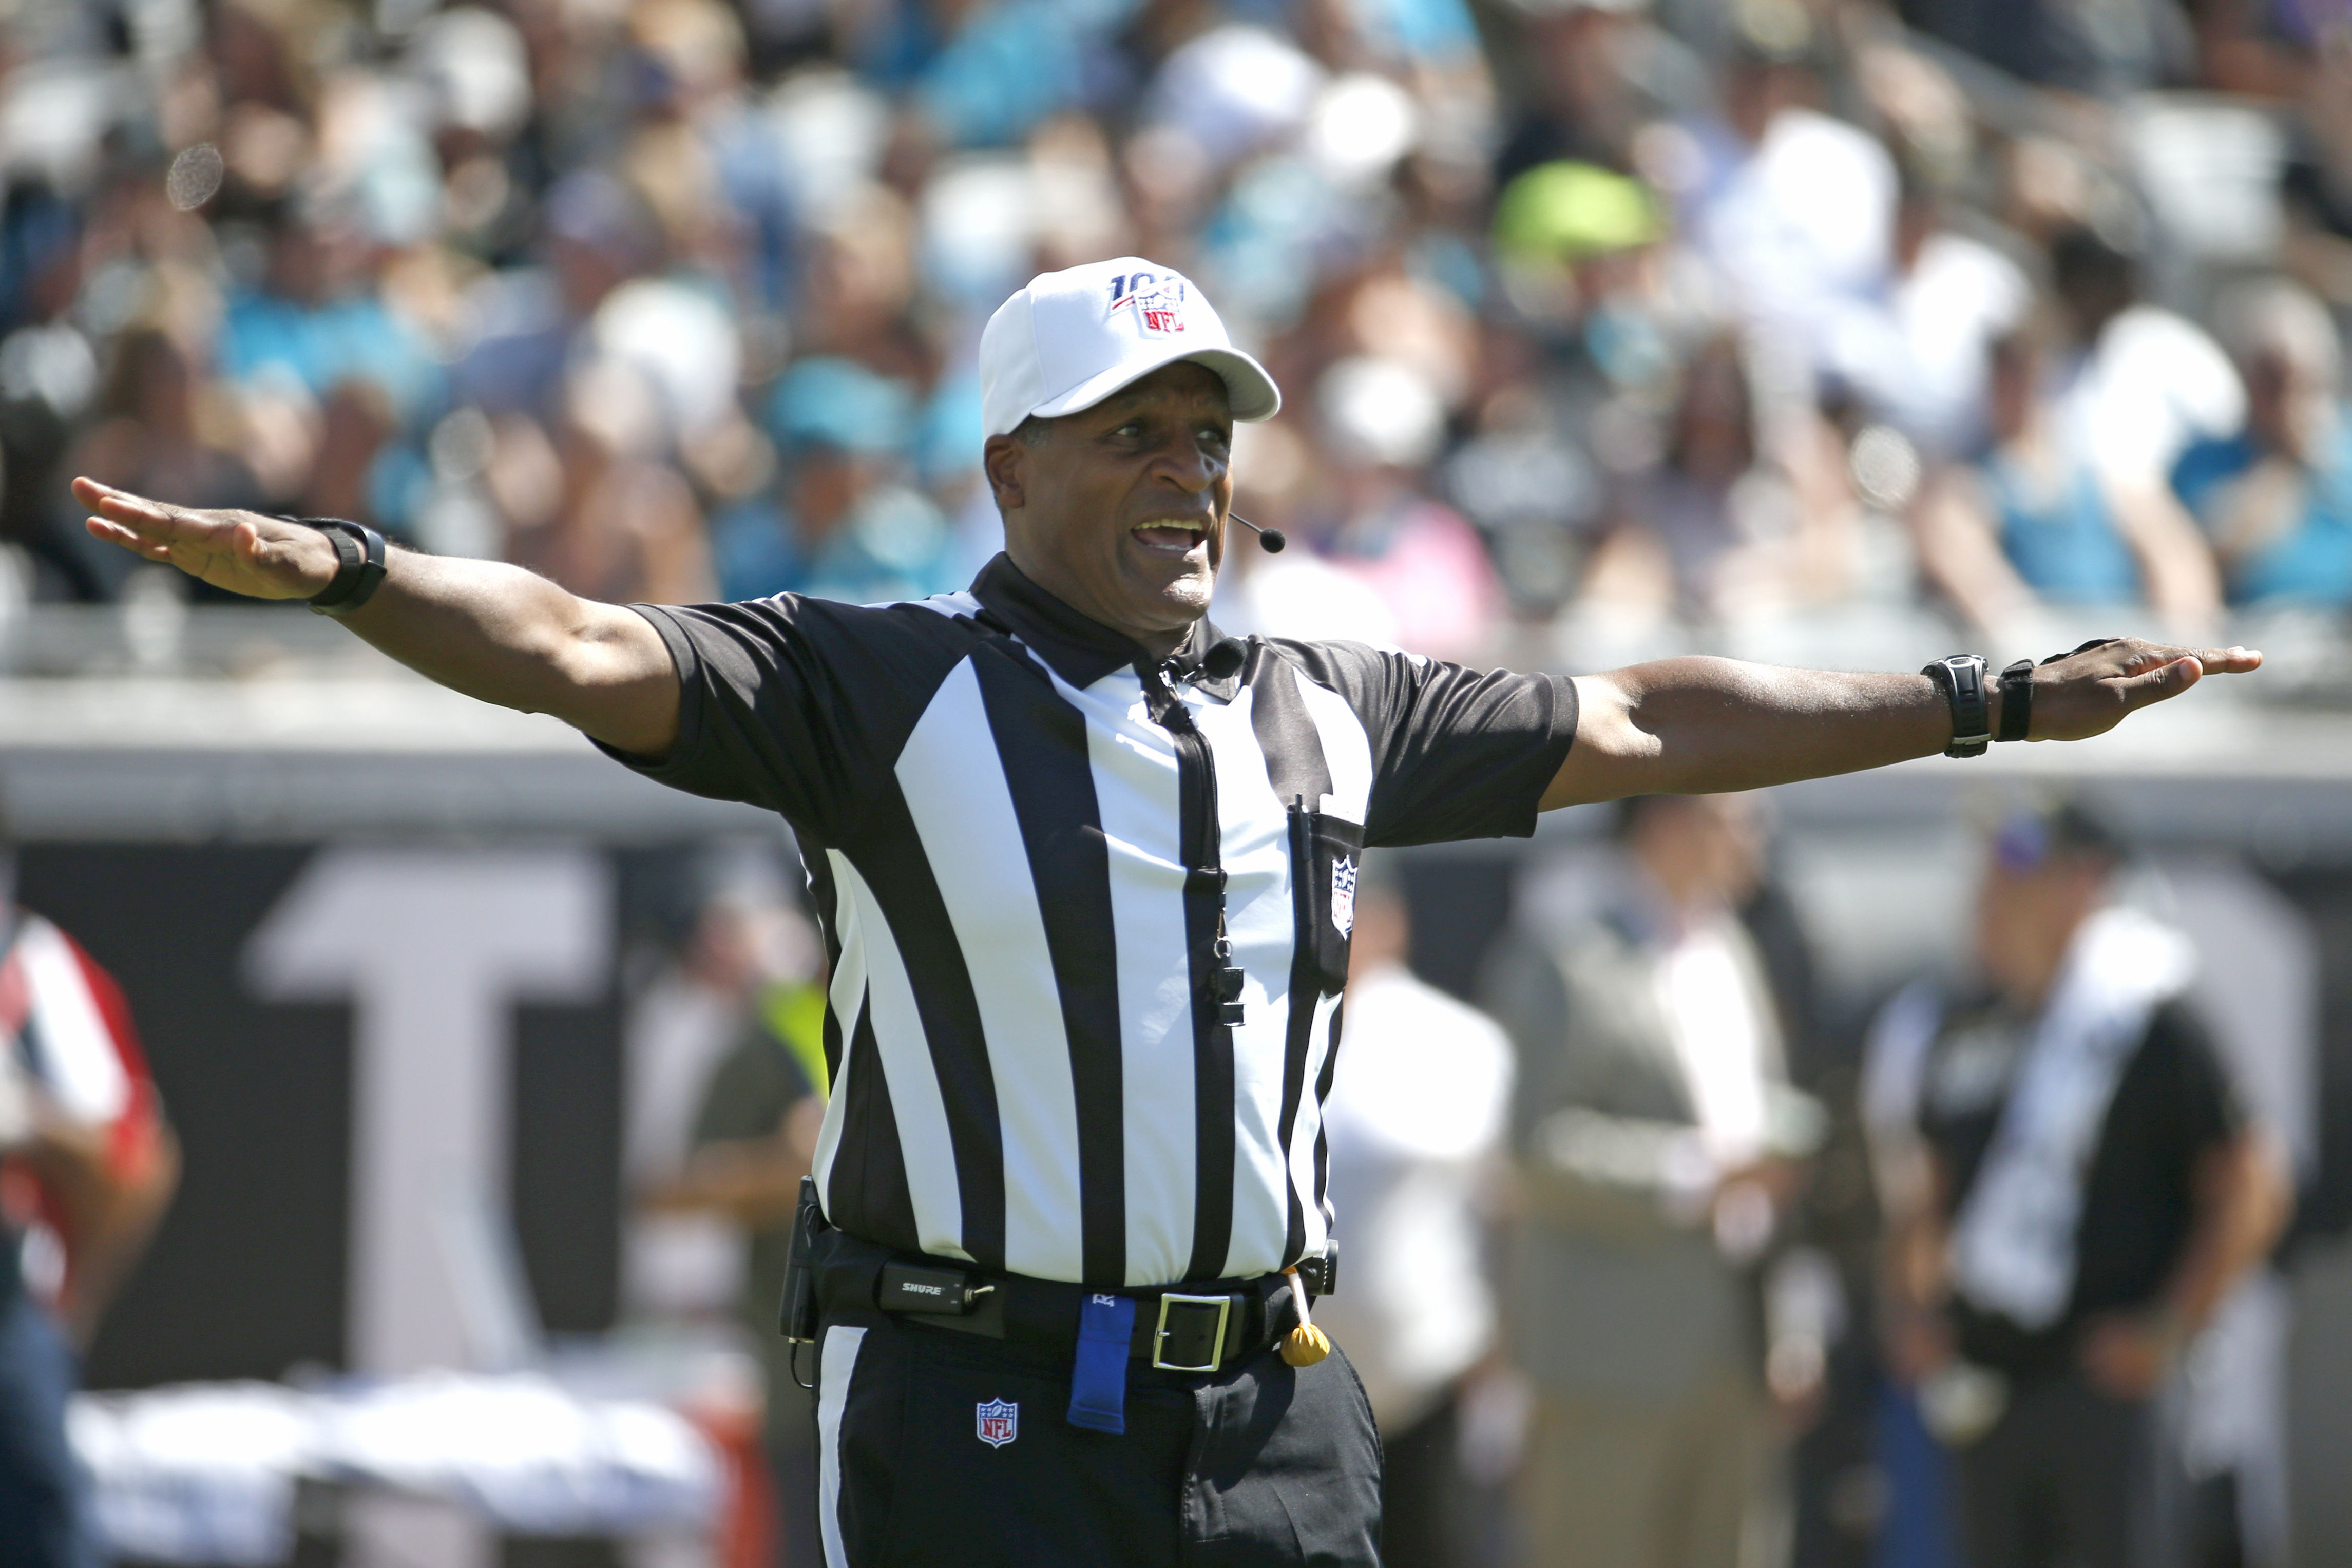 NFL announces retirement of referee Ed Hochuli, known for his